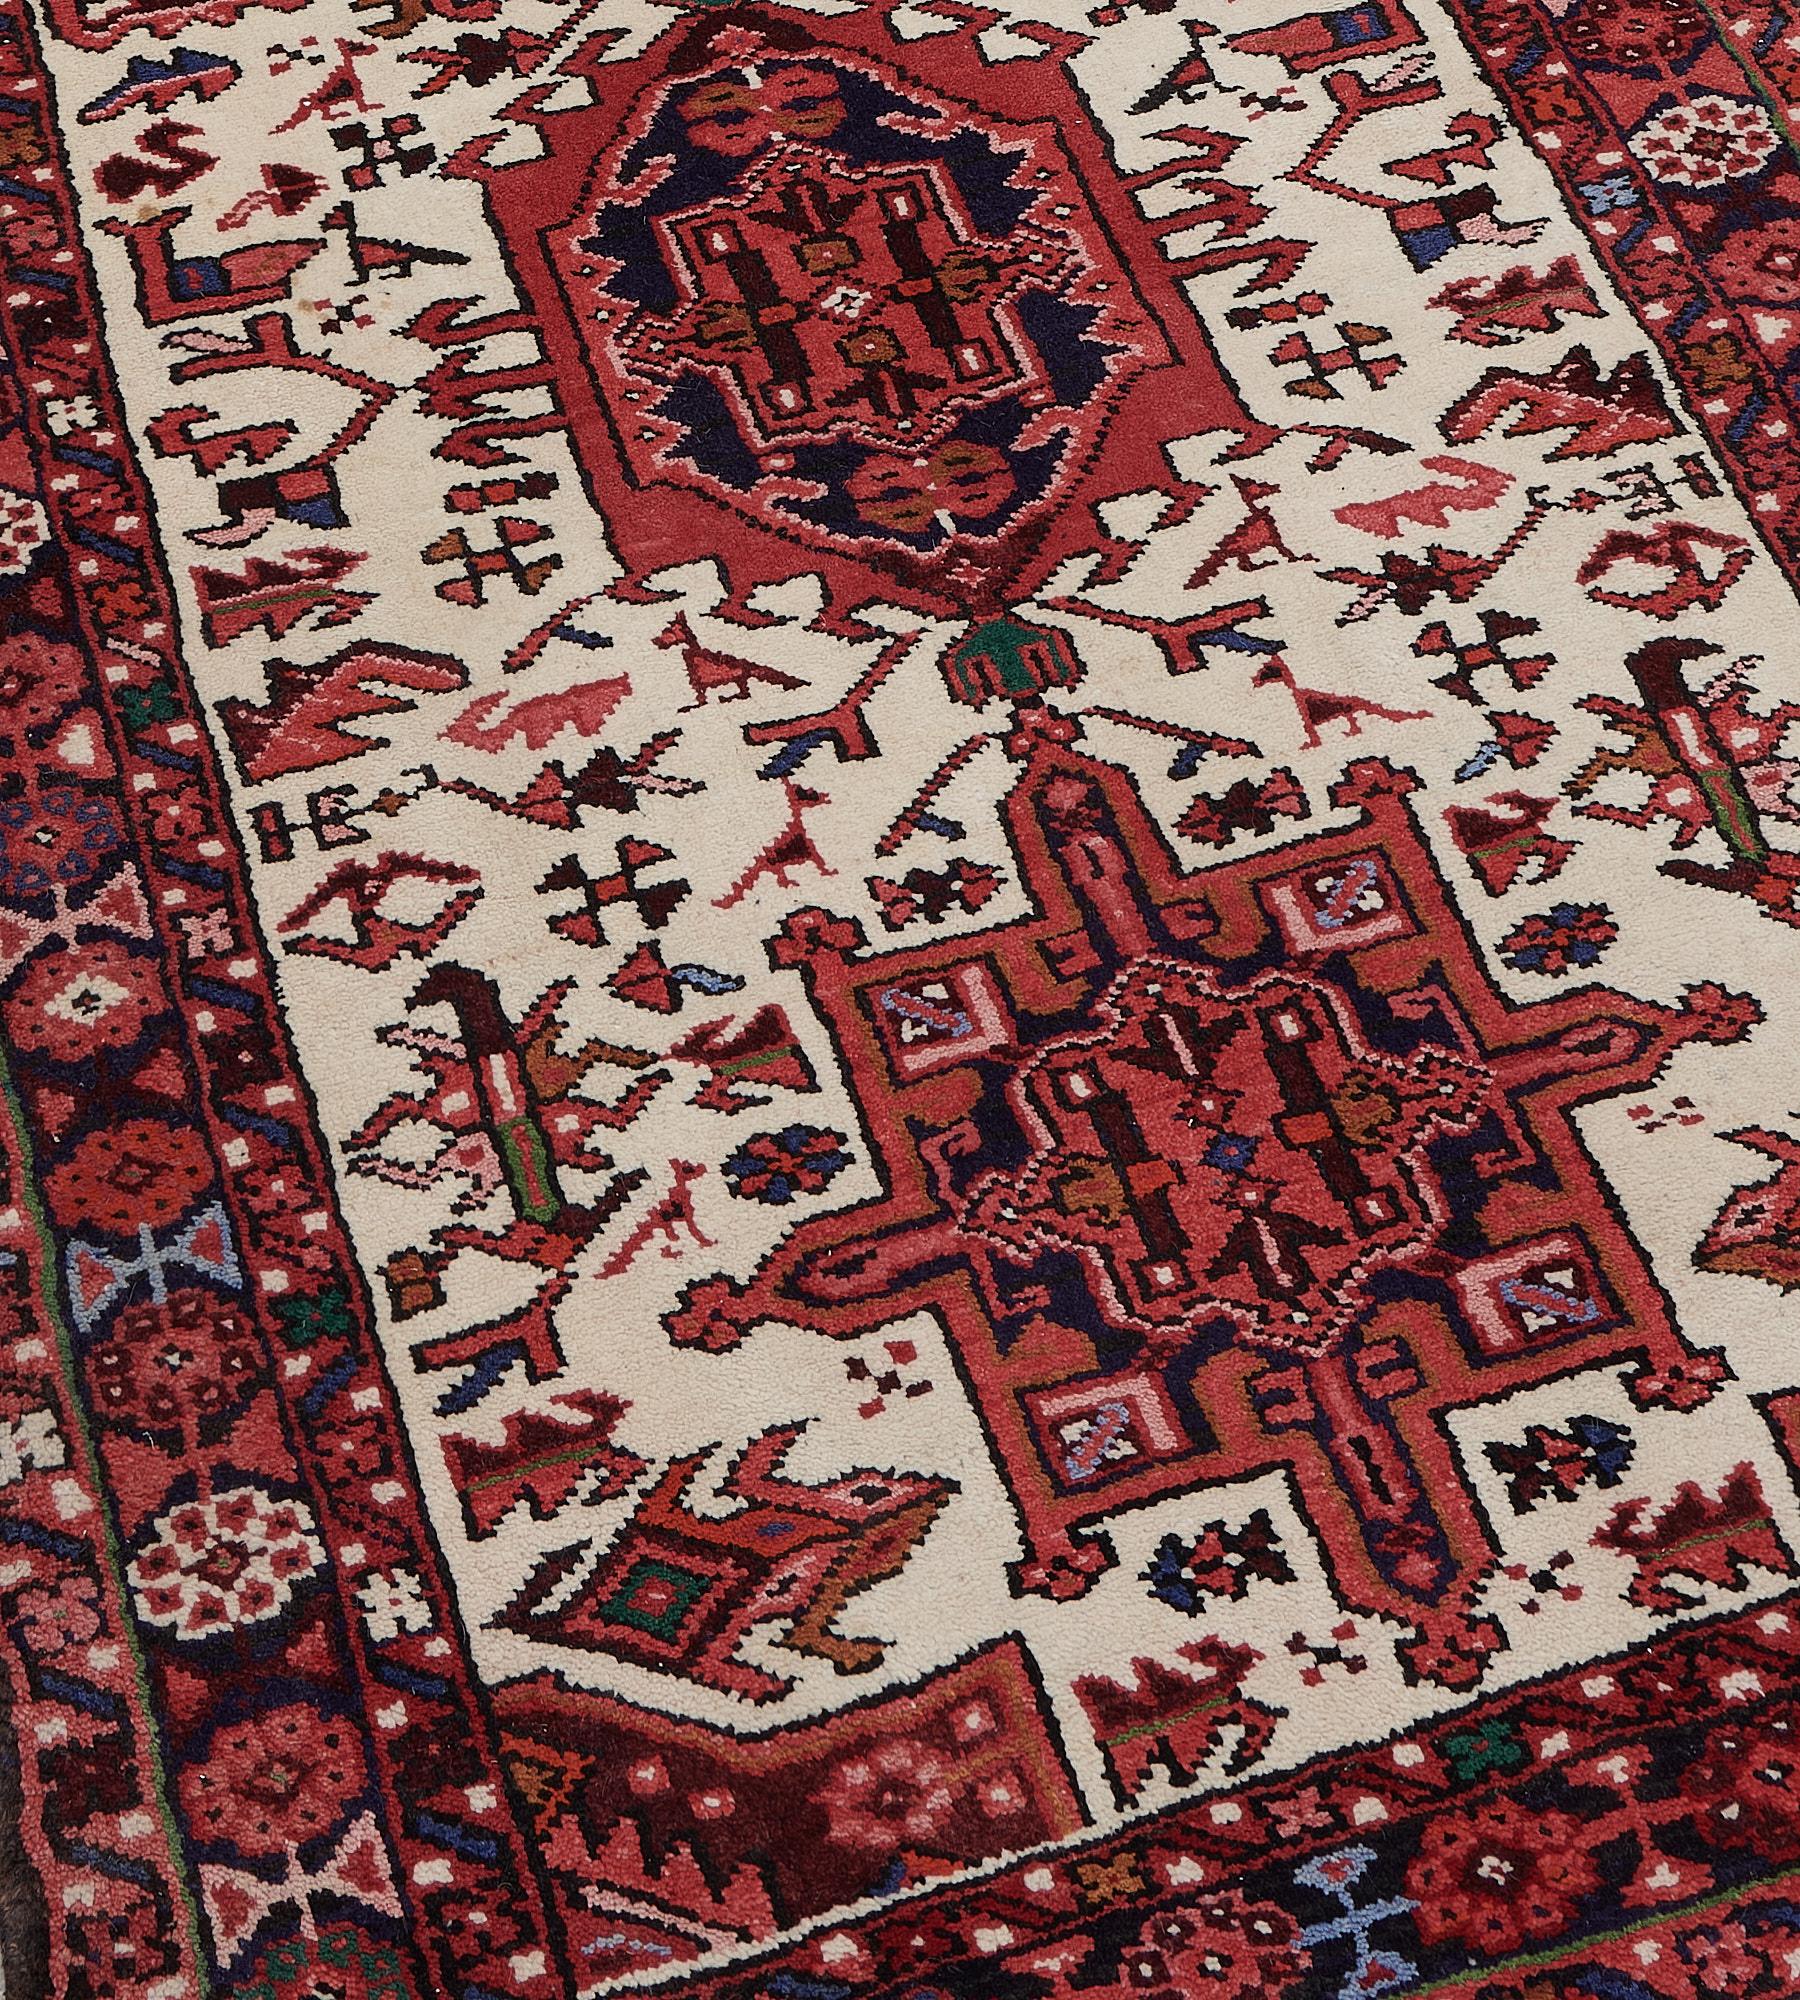 This vintage, circa 1960, Heriz runner has an ivory field with a central column of linked brick-red and indigo hooked shield lozenges surrounded by angular polychrome stylized floral and animal motifs, in an indigo-blue border of polychrome linked